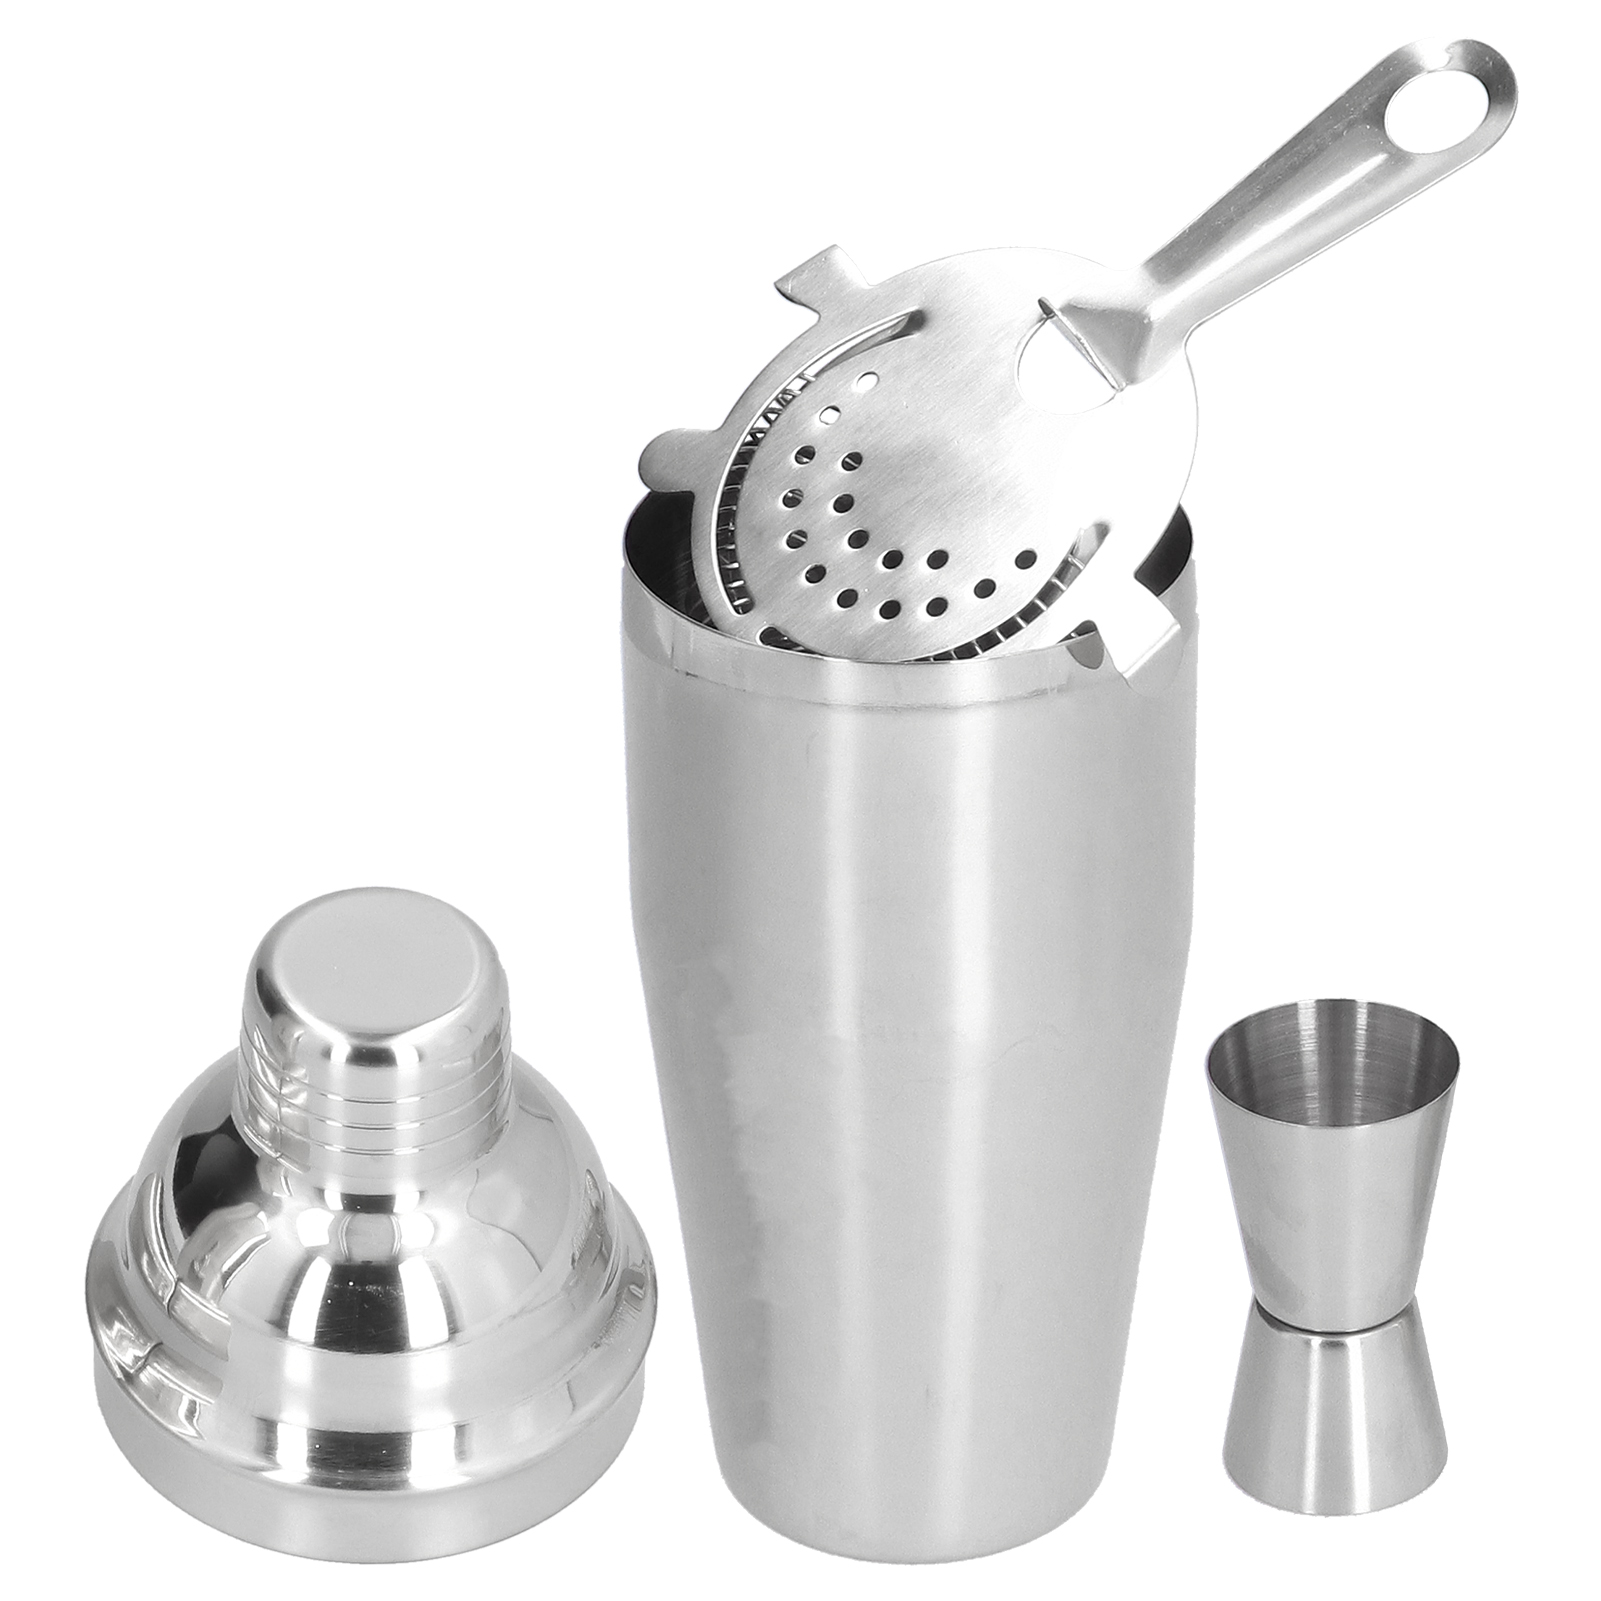 750ml Stainless Steel Cocktail Shaker Set Drink Mixer Bar Tools For Drink  Mixing Barware Tool Kit With Strainer Measure Cup Shaker For Bartender Bar 